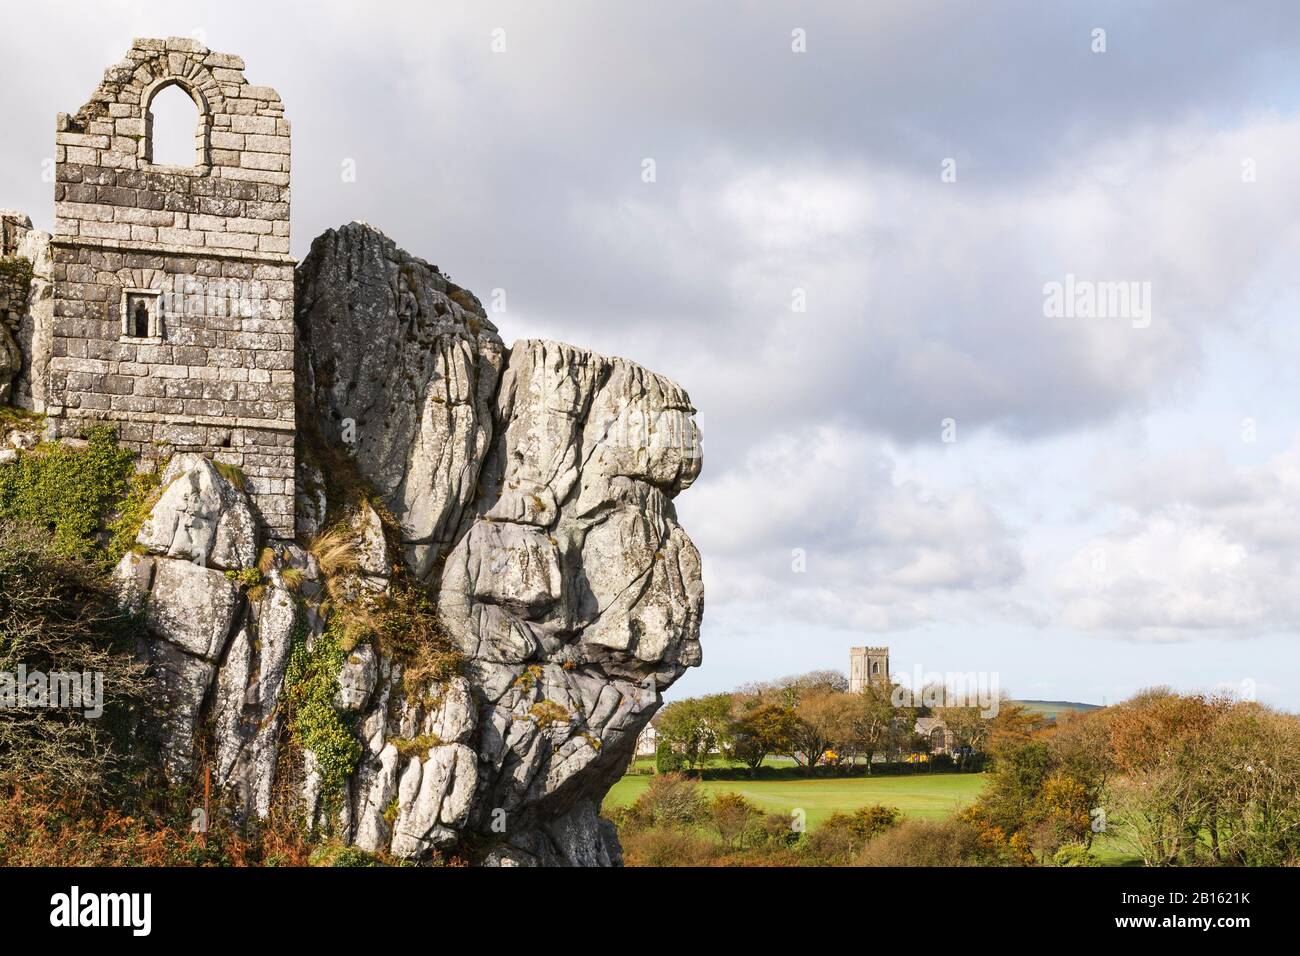 The ruins of St Michaels Chapel, a medieval hermitage on Roche Rock near St Austell, Cornwall, UK Stock Photo